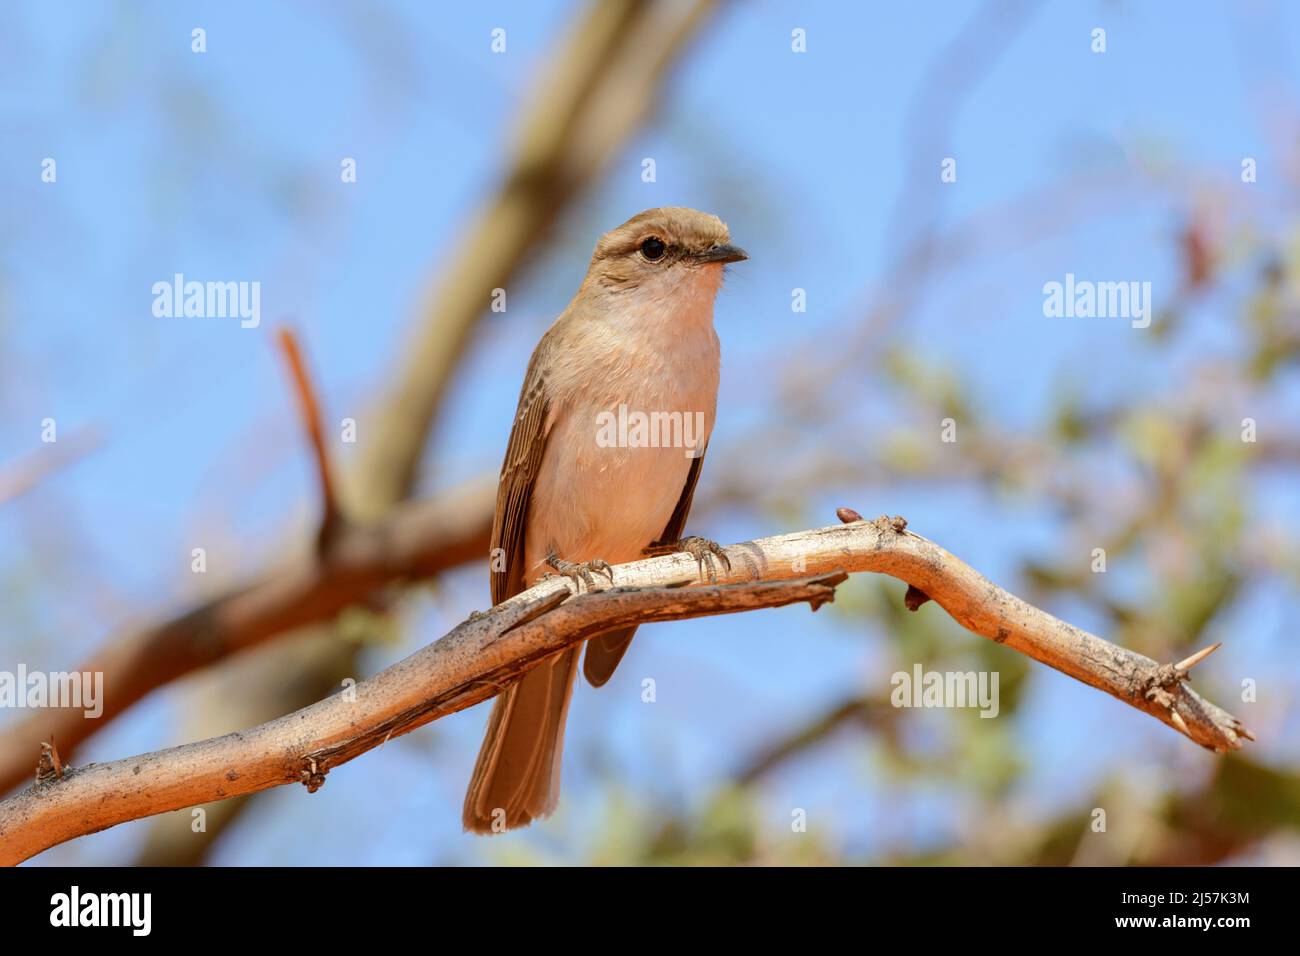 Pale Flycatcher (Melaenornis pallidus), a passerine bird of the Old World flycatcher family Muscicapidae, found in Namibia and Sub-Saharan Africa ... Stock Photo